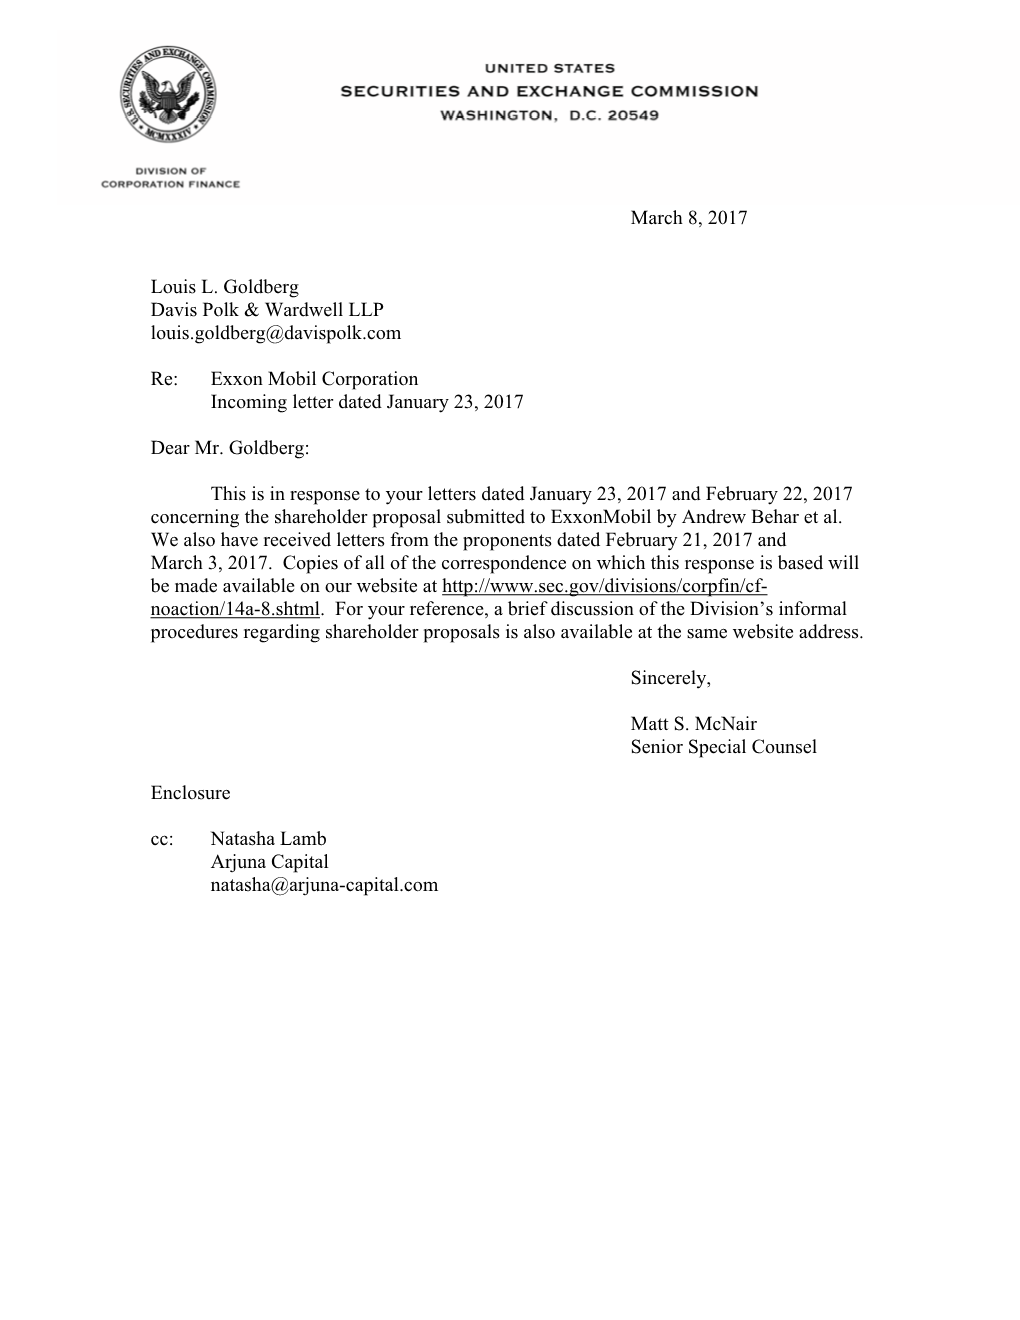 Exxon Mobil Corporation Incoming Letter Dated January 23, 2017